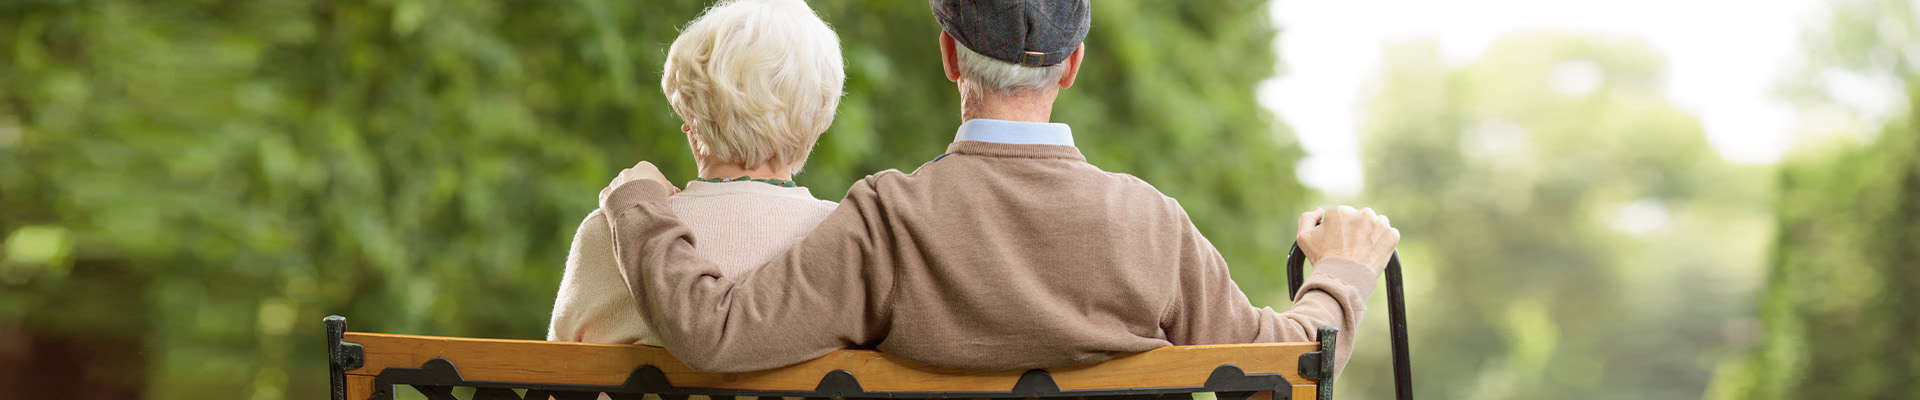 Senior man with cane and his wife take a break on a park bench; view of their backs as they face away.